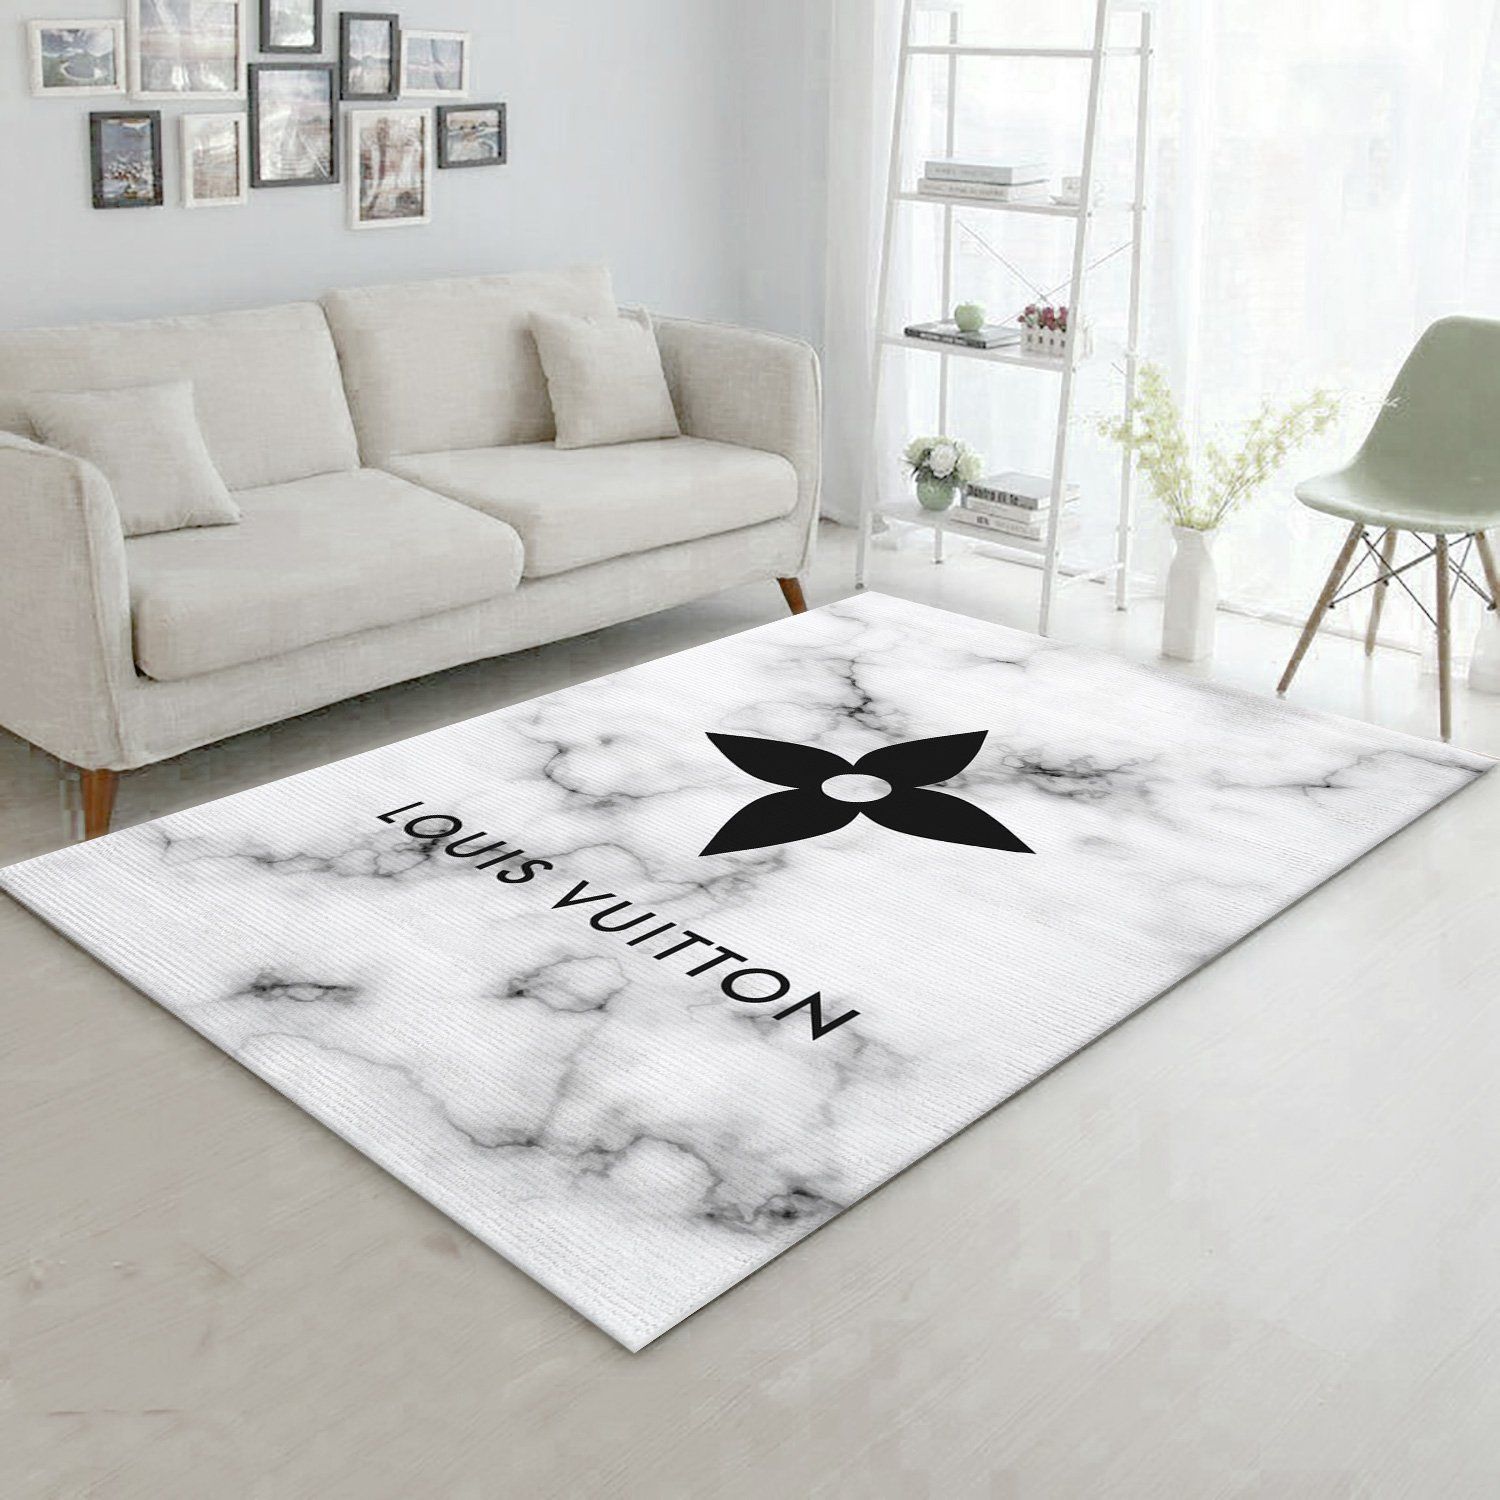 Louis Vuitton Area Rugs Fashion Brand Rug Floor Decor Home Decor - Travels  in Translation